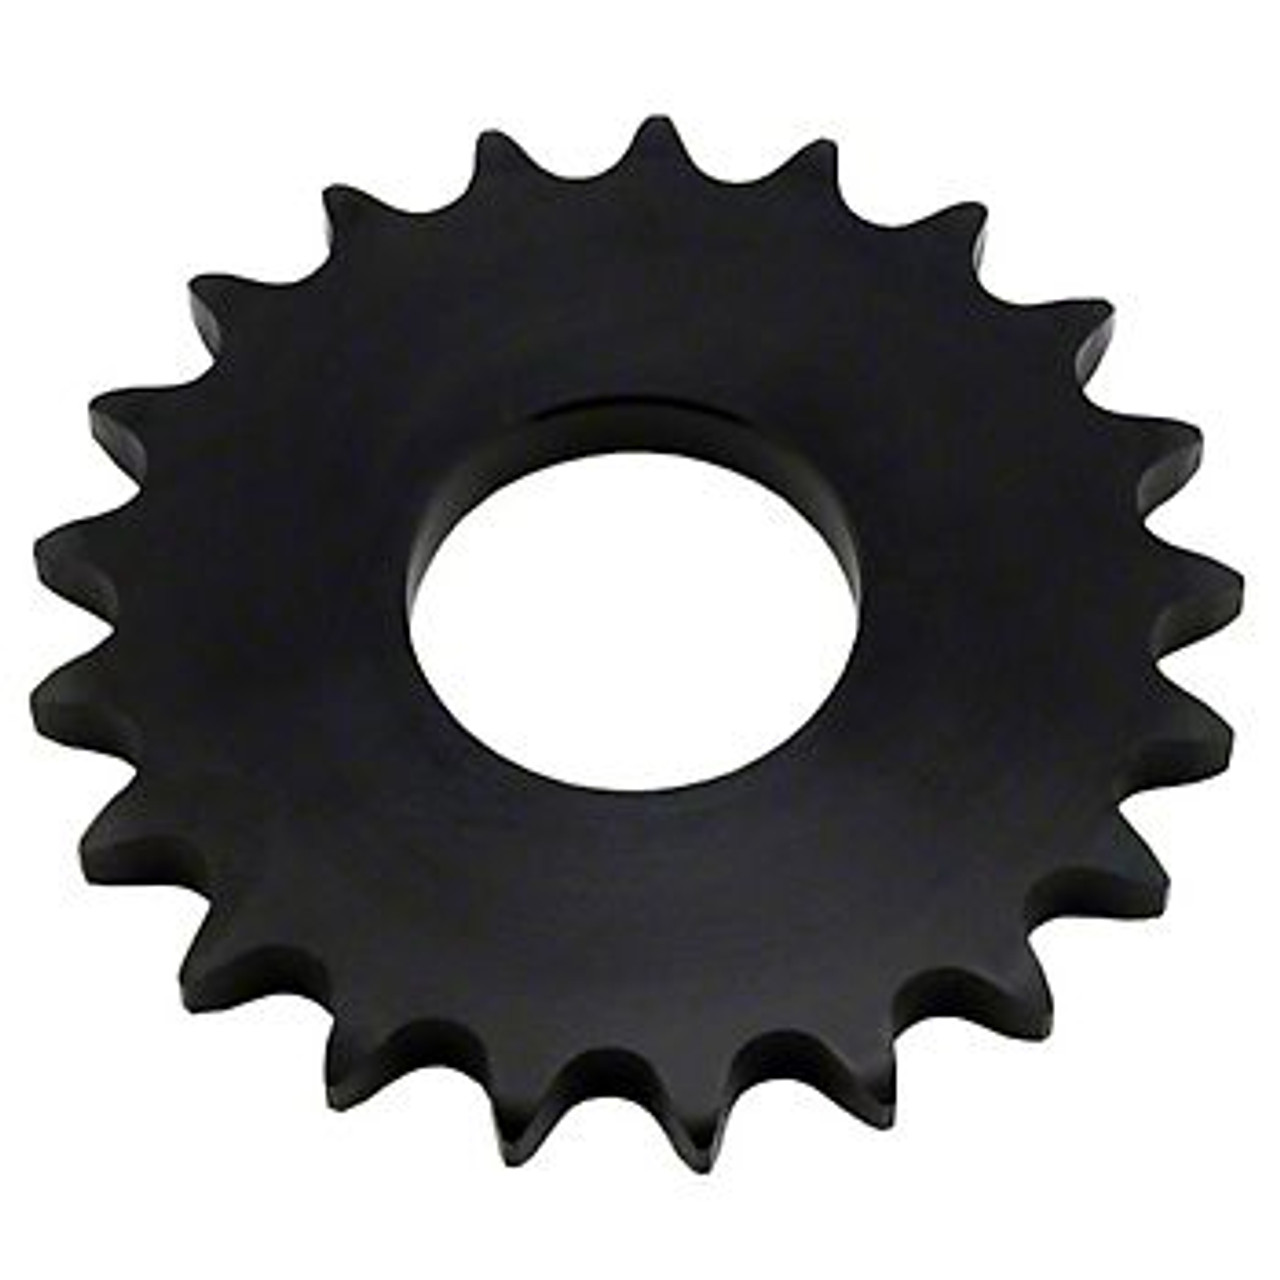 Hardened Tooth Weld-On Sprocket   H40X72